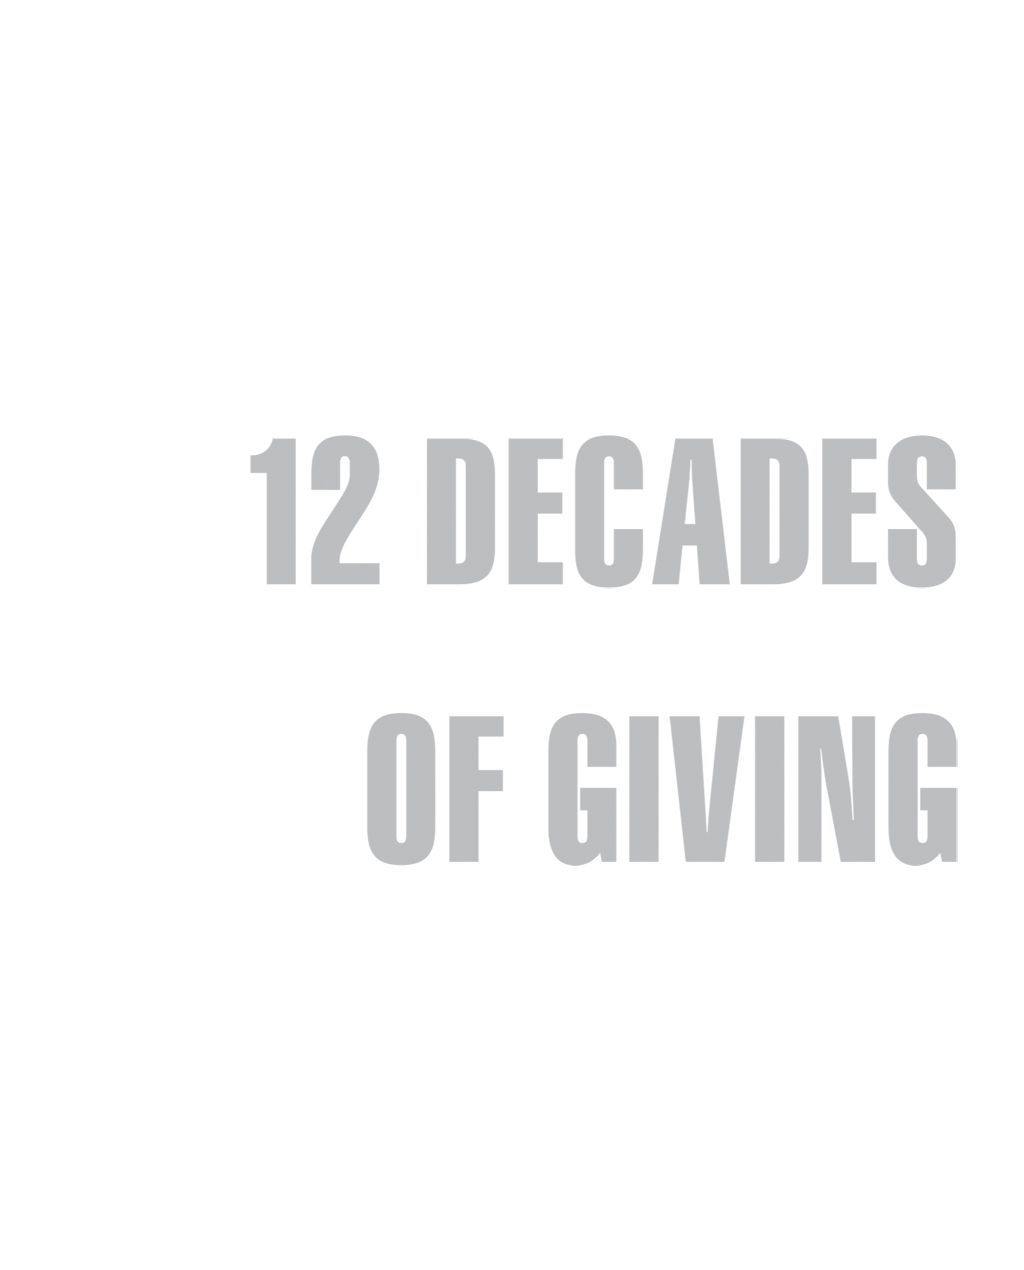 KTC 12 Decades of Giving